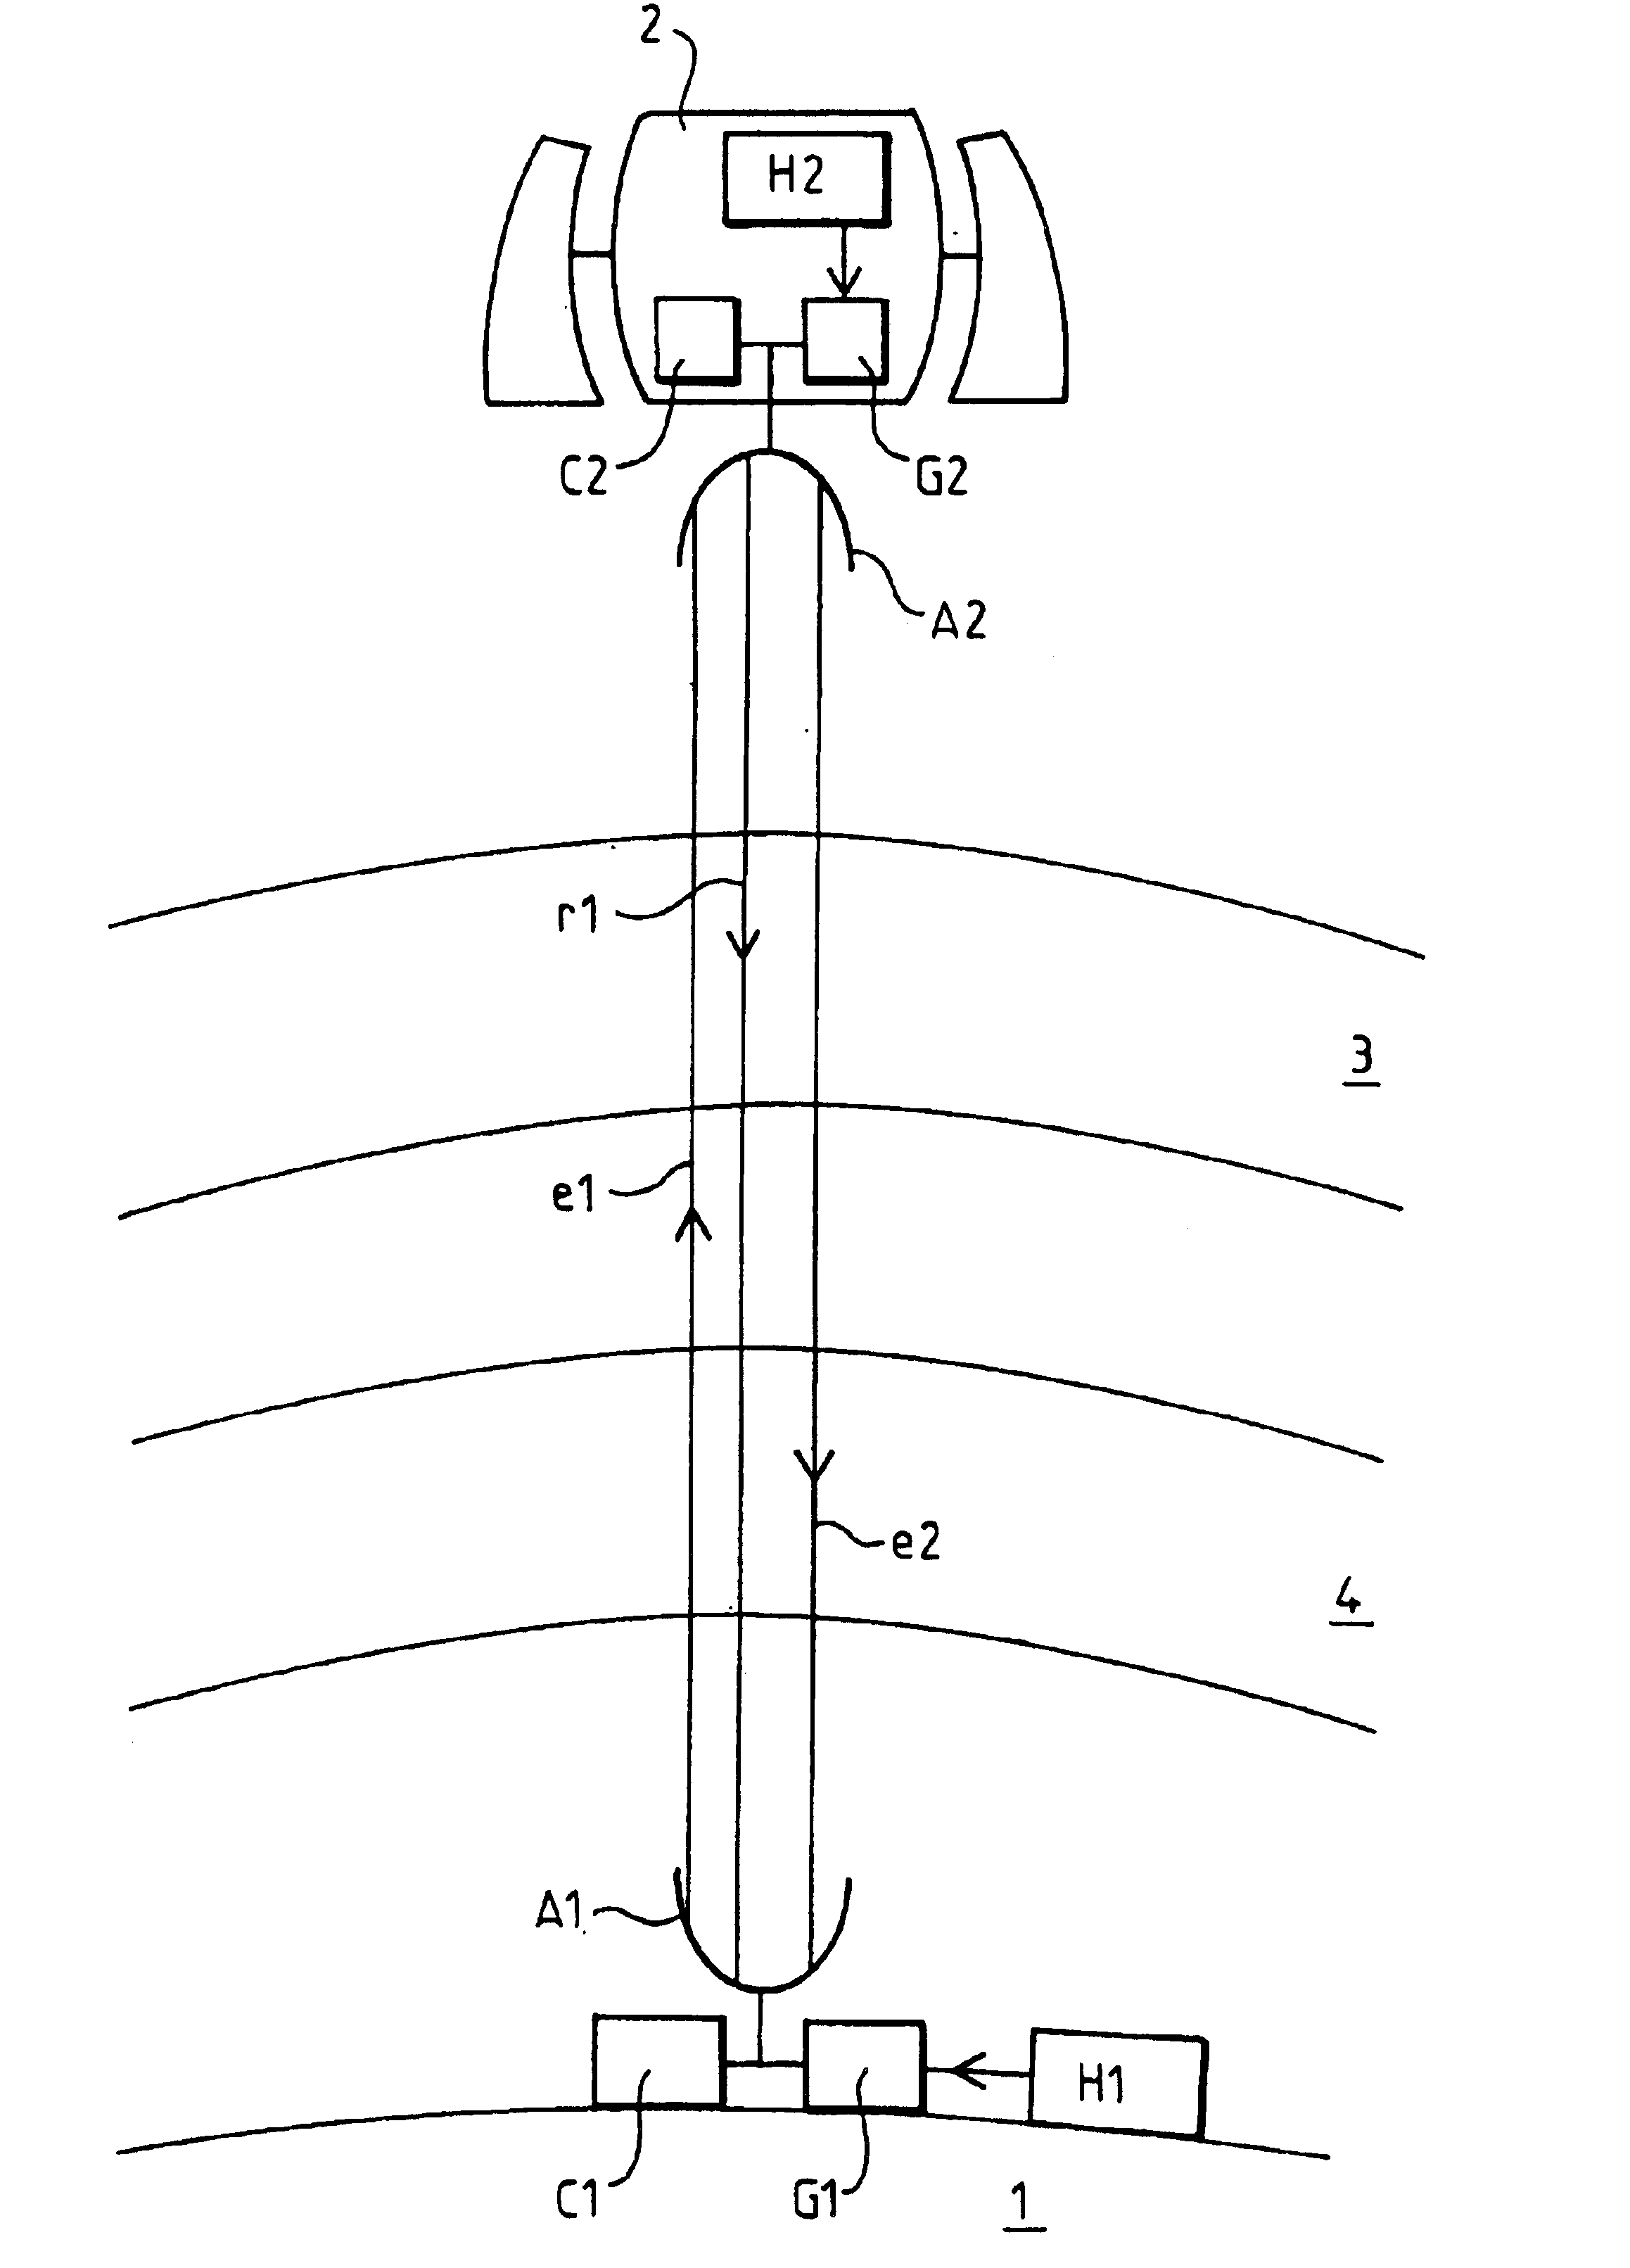 Device for exchanging radio signals provided with time markers for synchronizing clocks